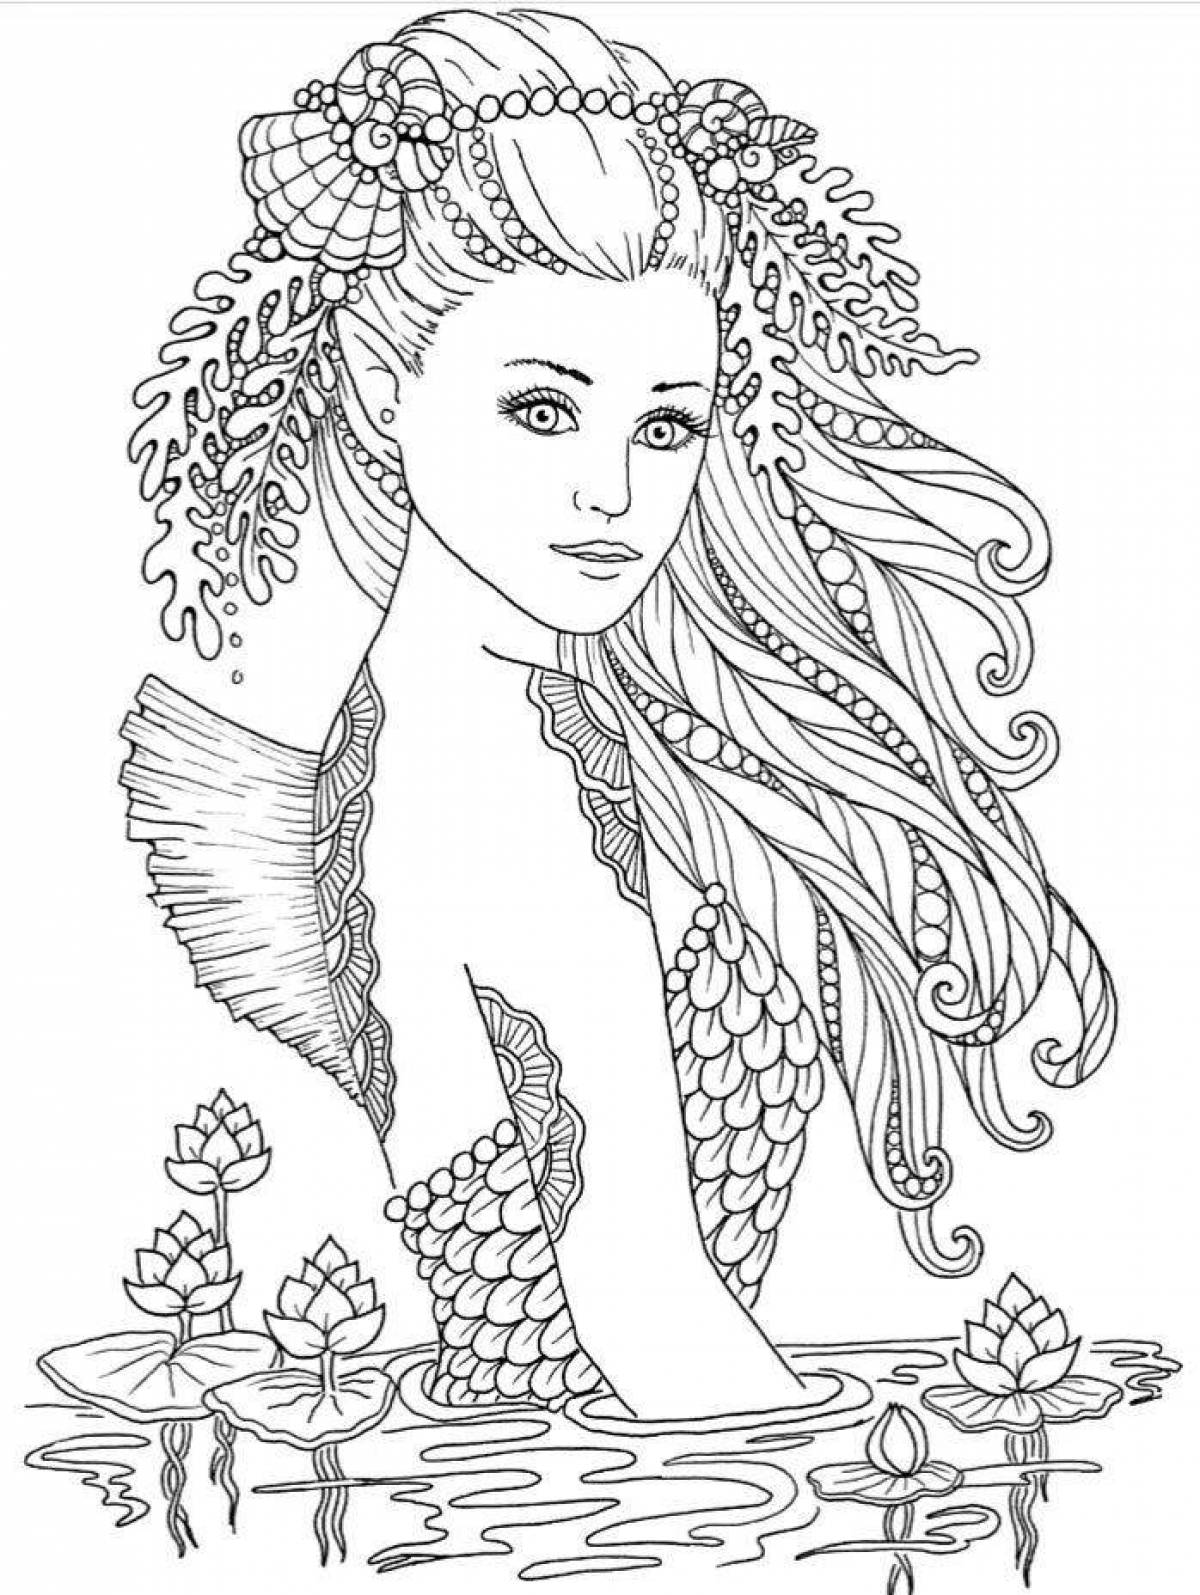 Sublime coloring page antistress mermaid